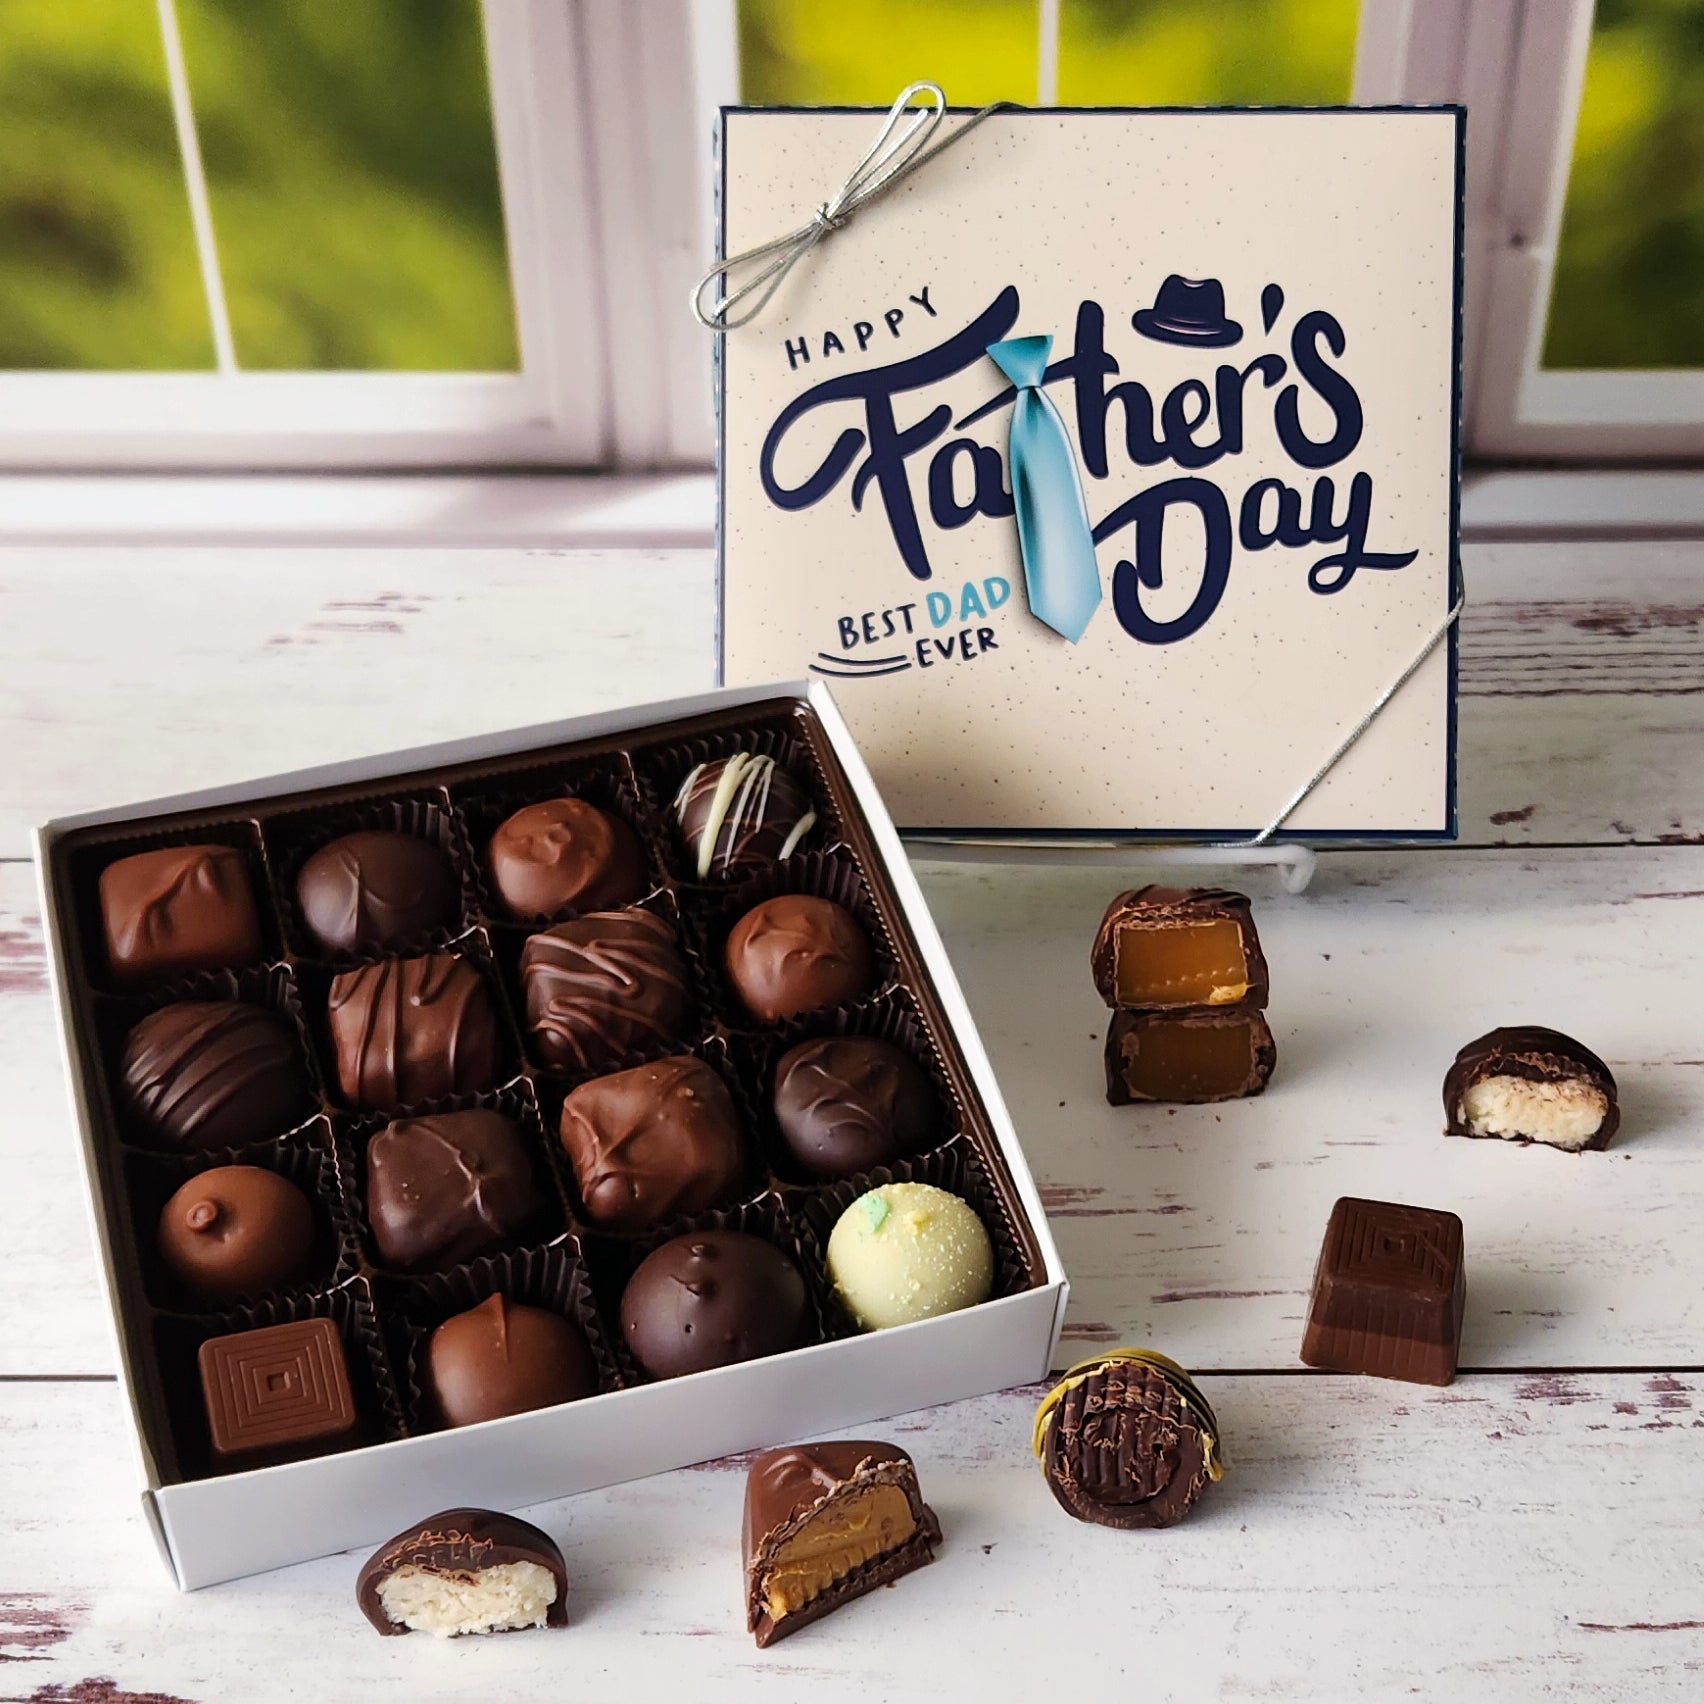 Wish Dad a Happy Father's Day with this delicious chocolate assortment featuring 16 pieces of creams, caramels, truffles and meltaways!